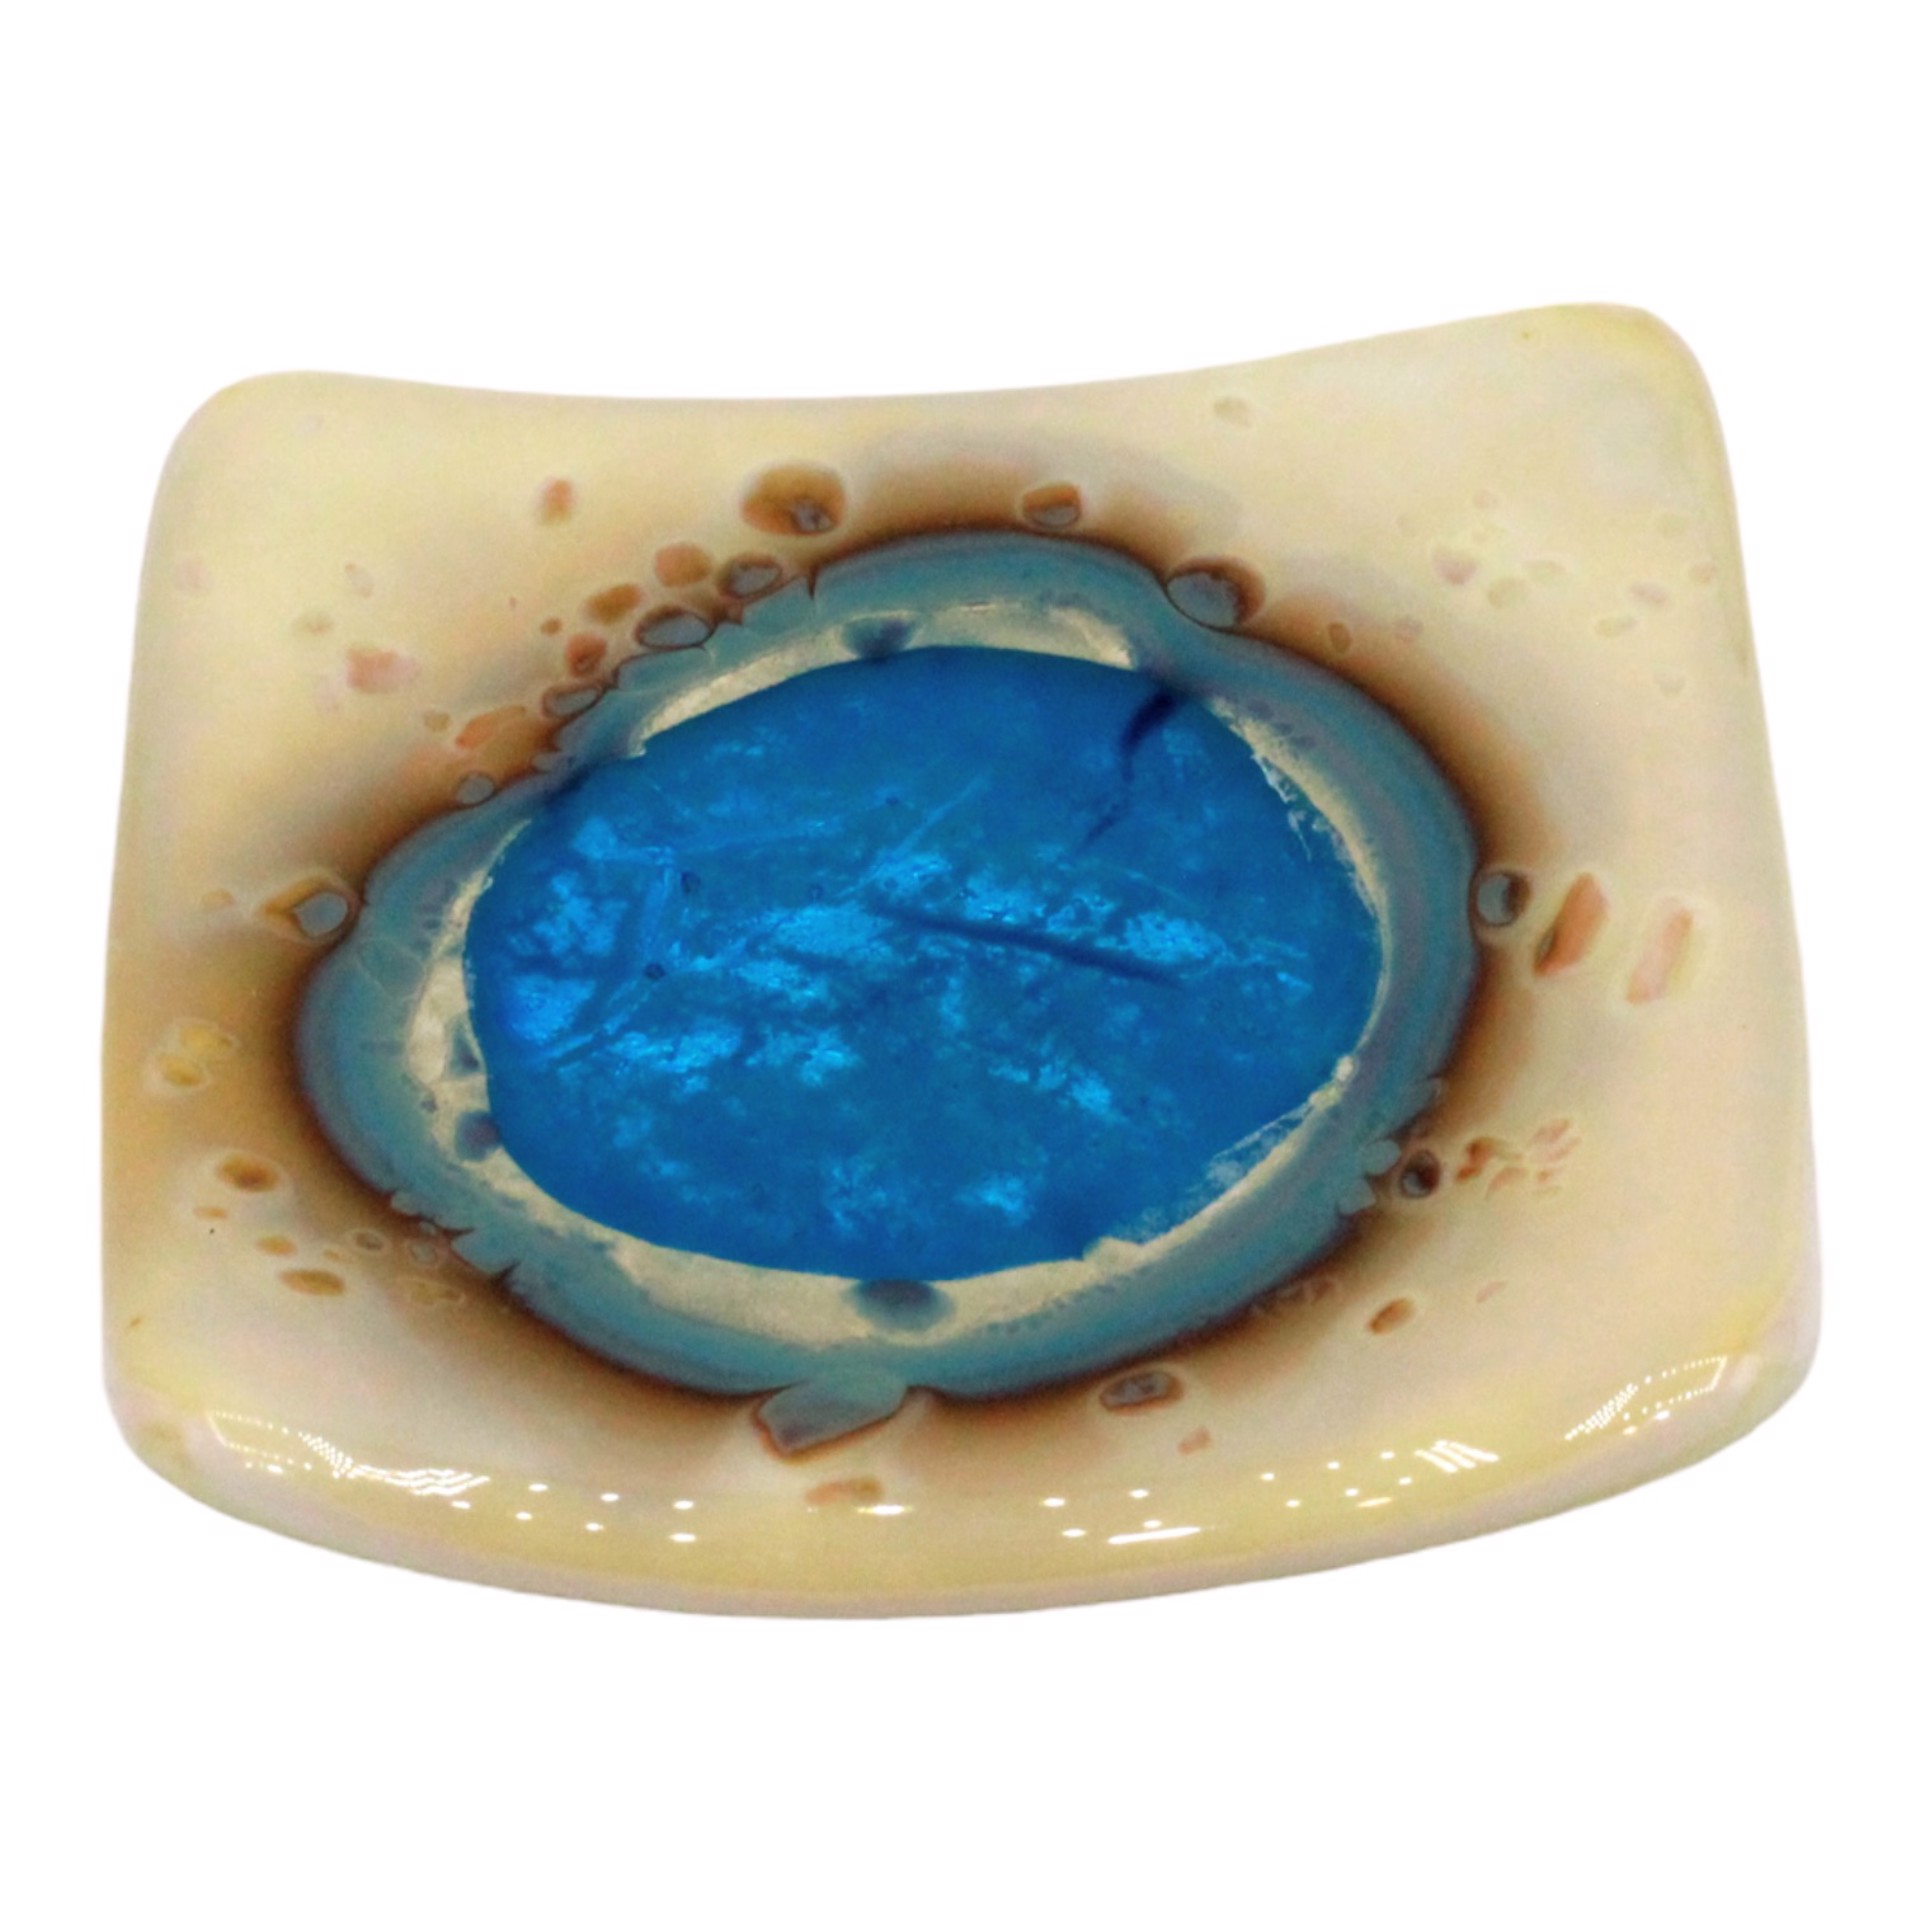 Thermal Puddle Mini - Plate by Kathy Burk